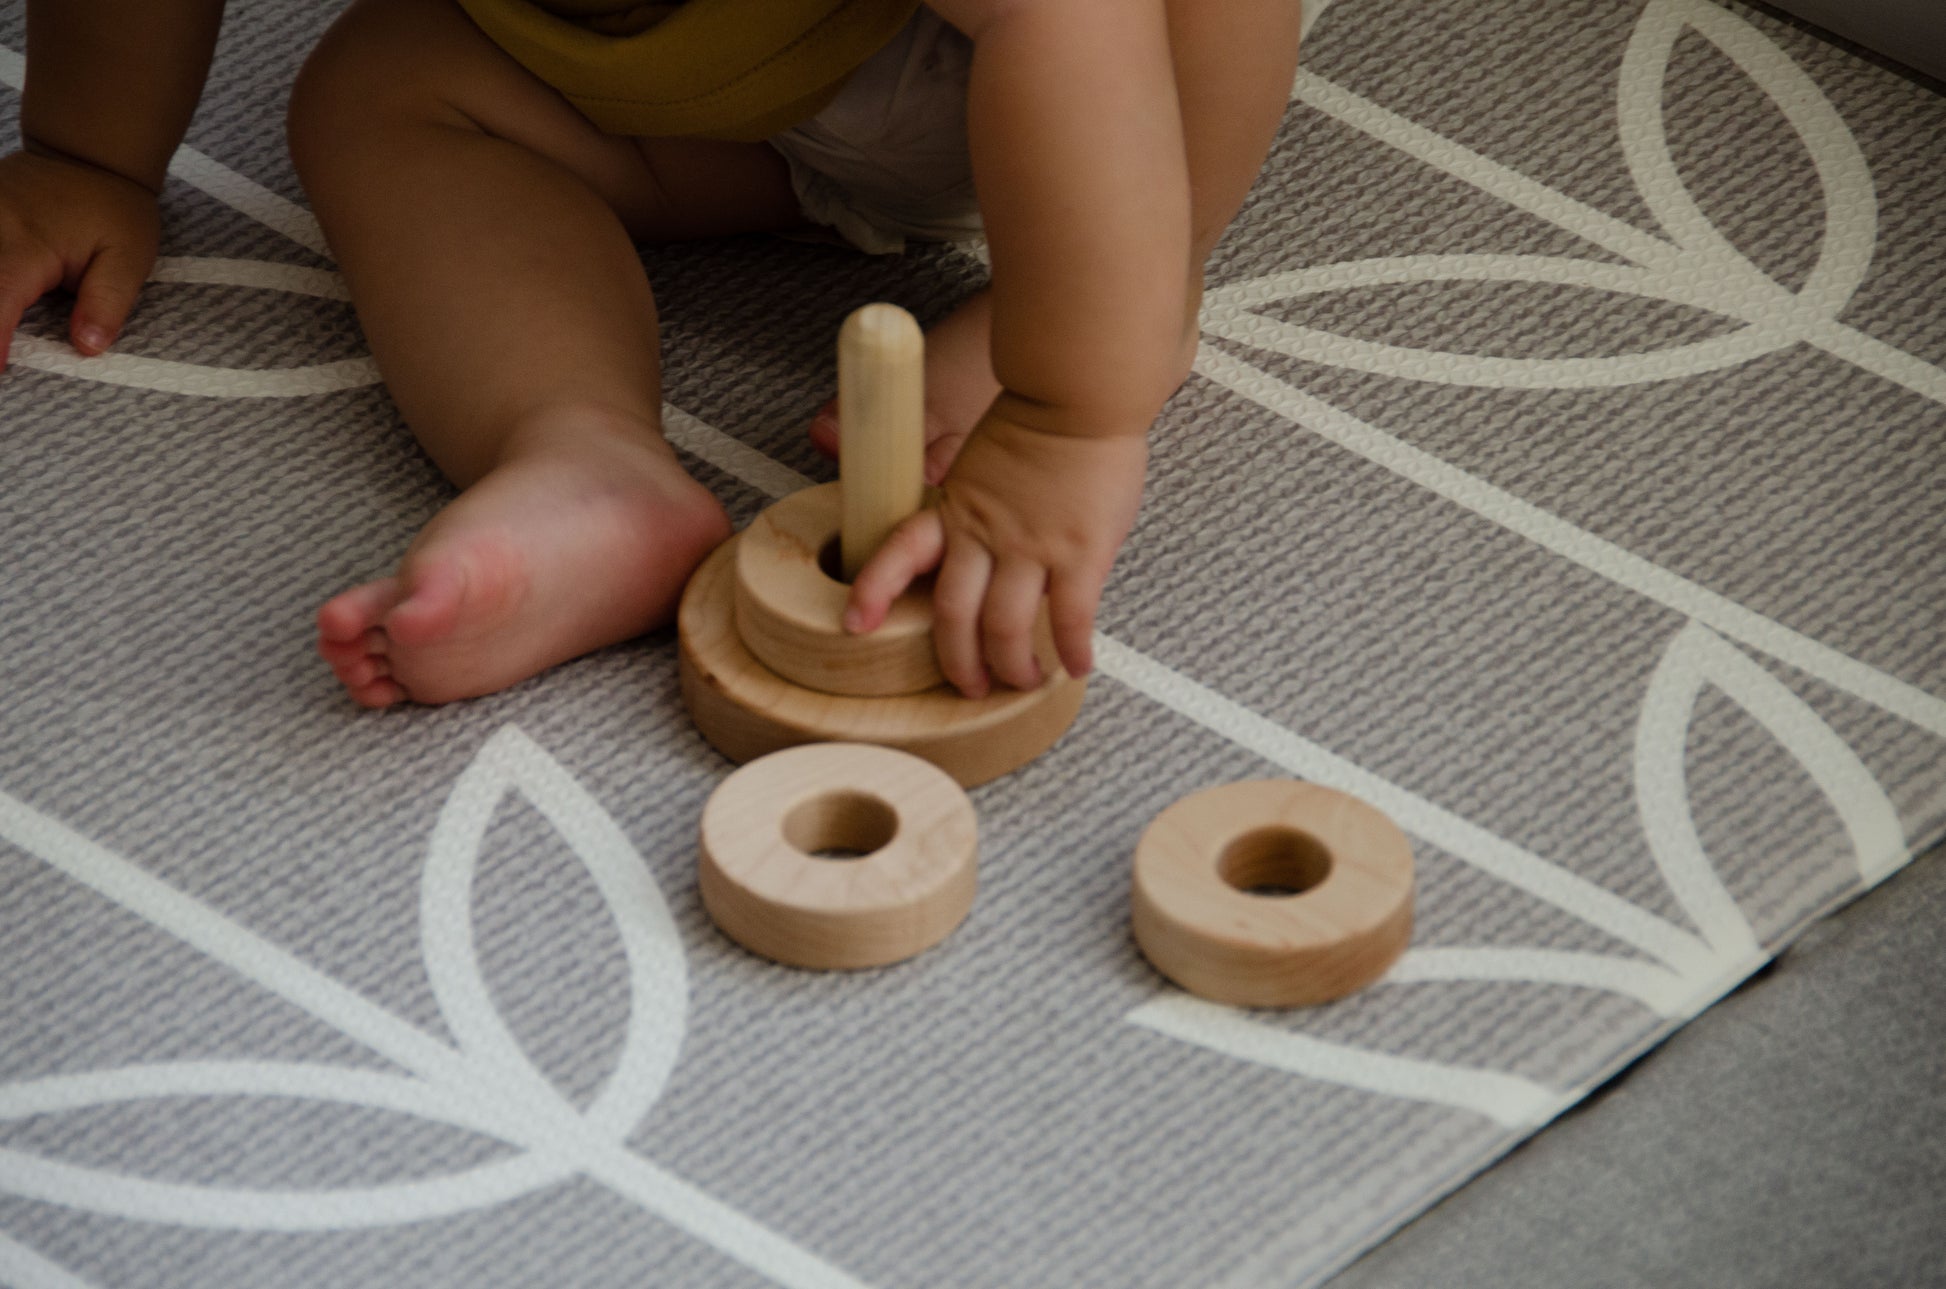 In a heartwarming close-up, the baby girl's tiny hands gently place the first ring on the Vertical Dowel. With focused determination and a sense of accomplishment, she navigates the task, showcasing her early motor skills and concentration during this precious playtime moment.